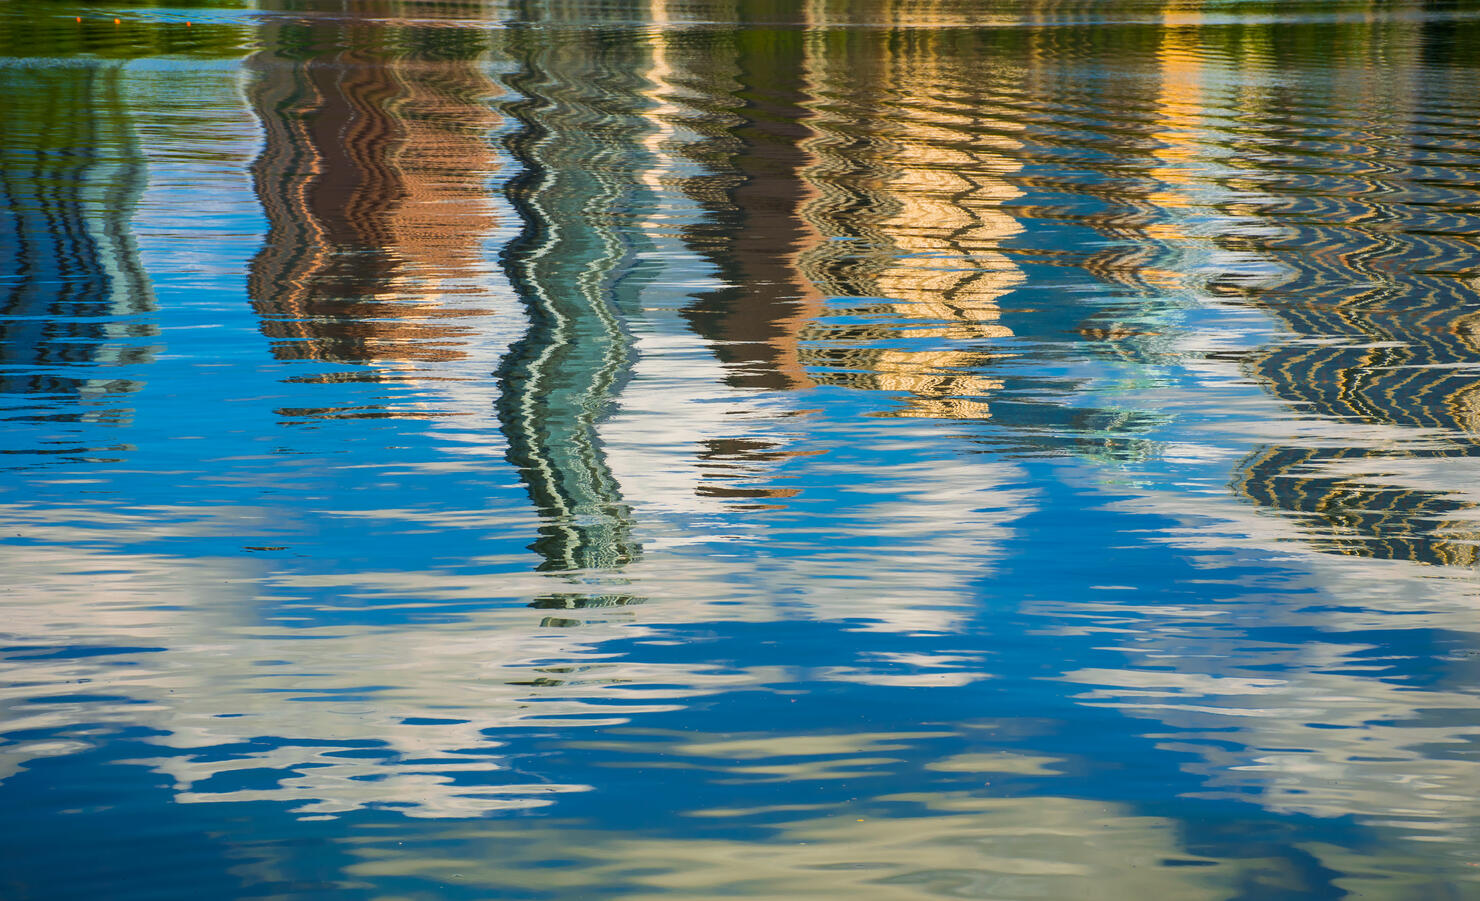 Abstract Water Art Austin Texas Town Lake Wave Reflections